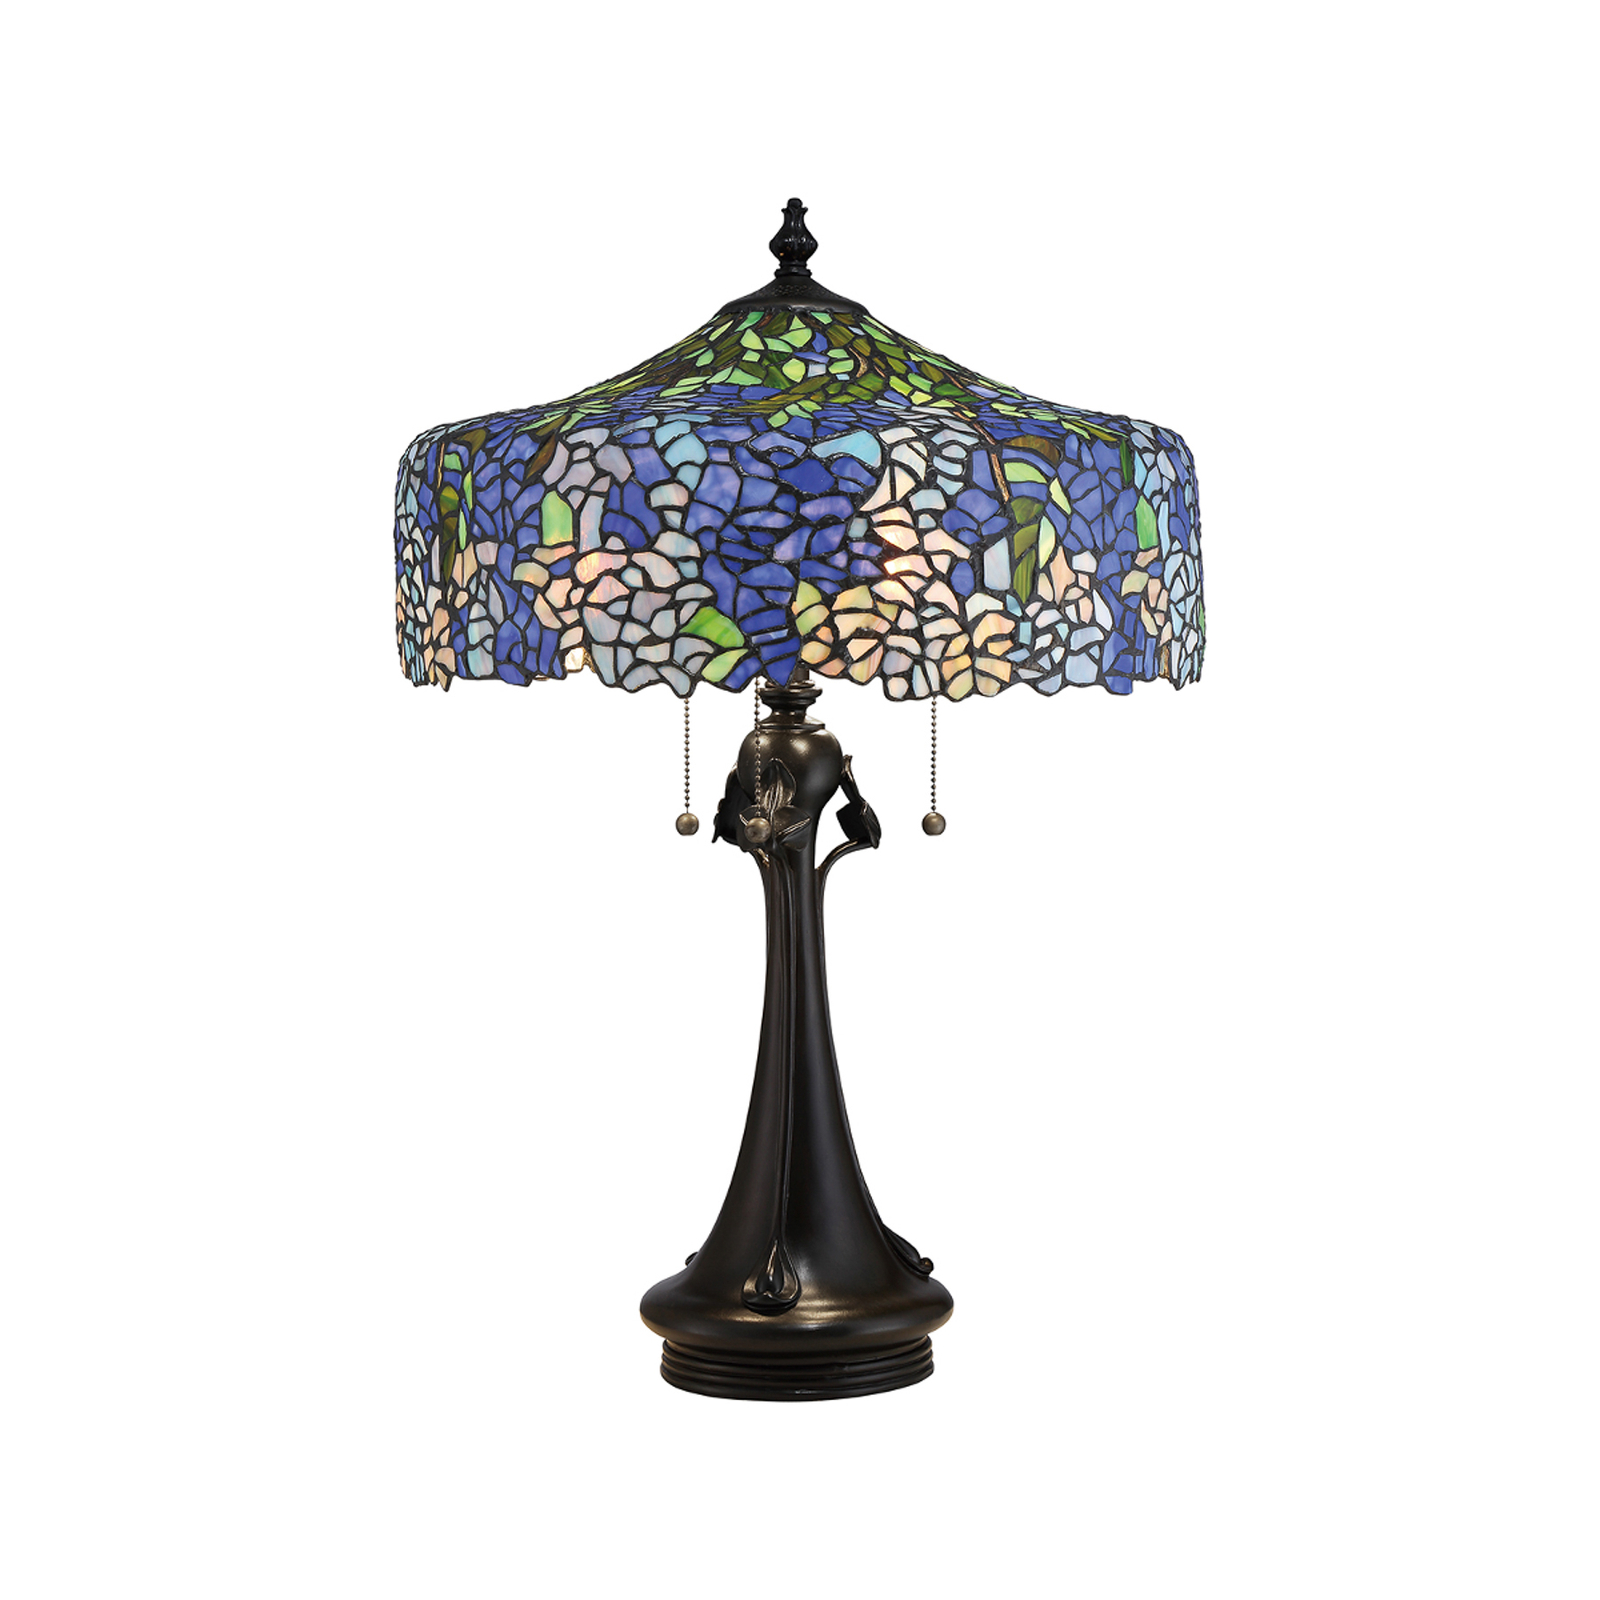 Cobalt table lamp in a Tiffany design